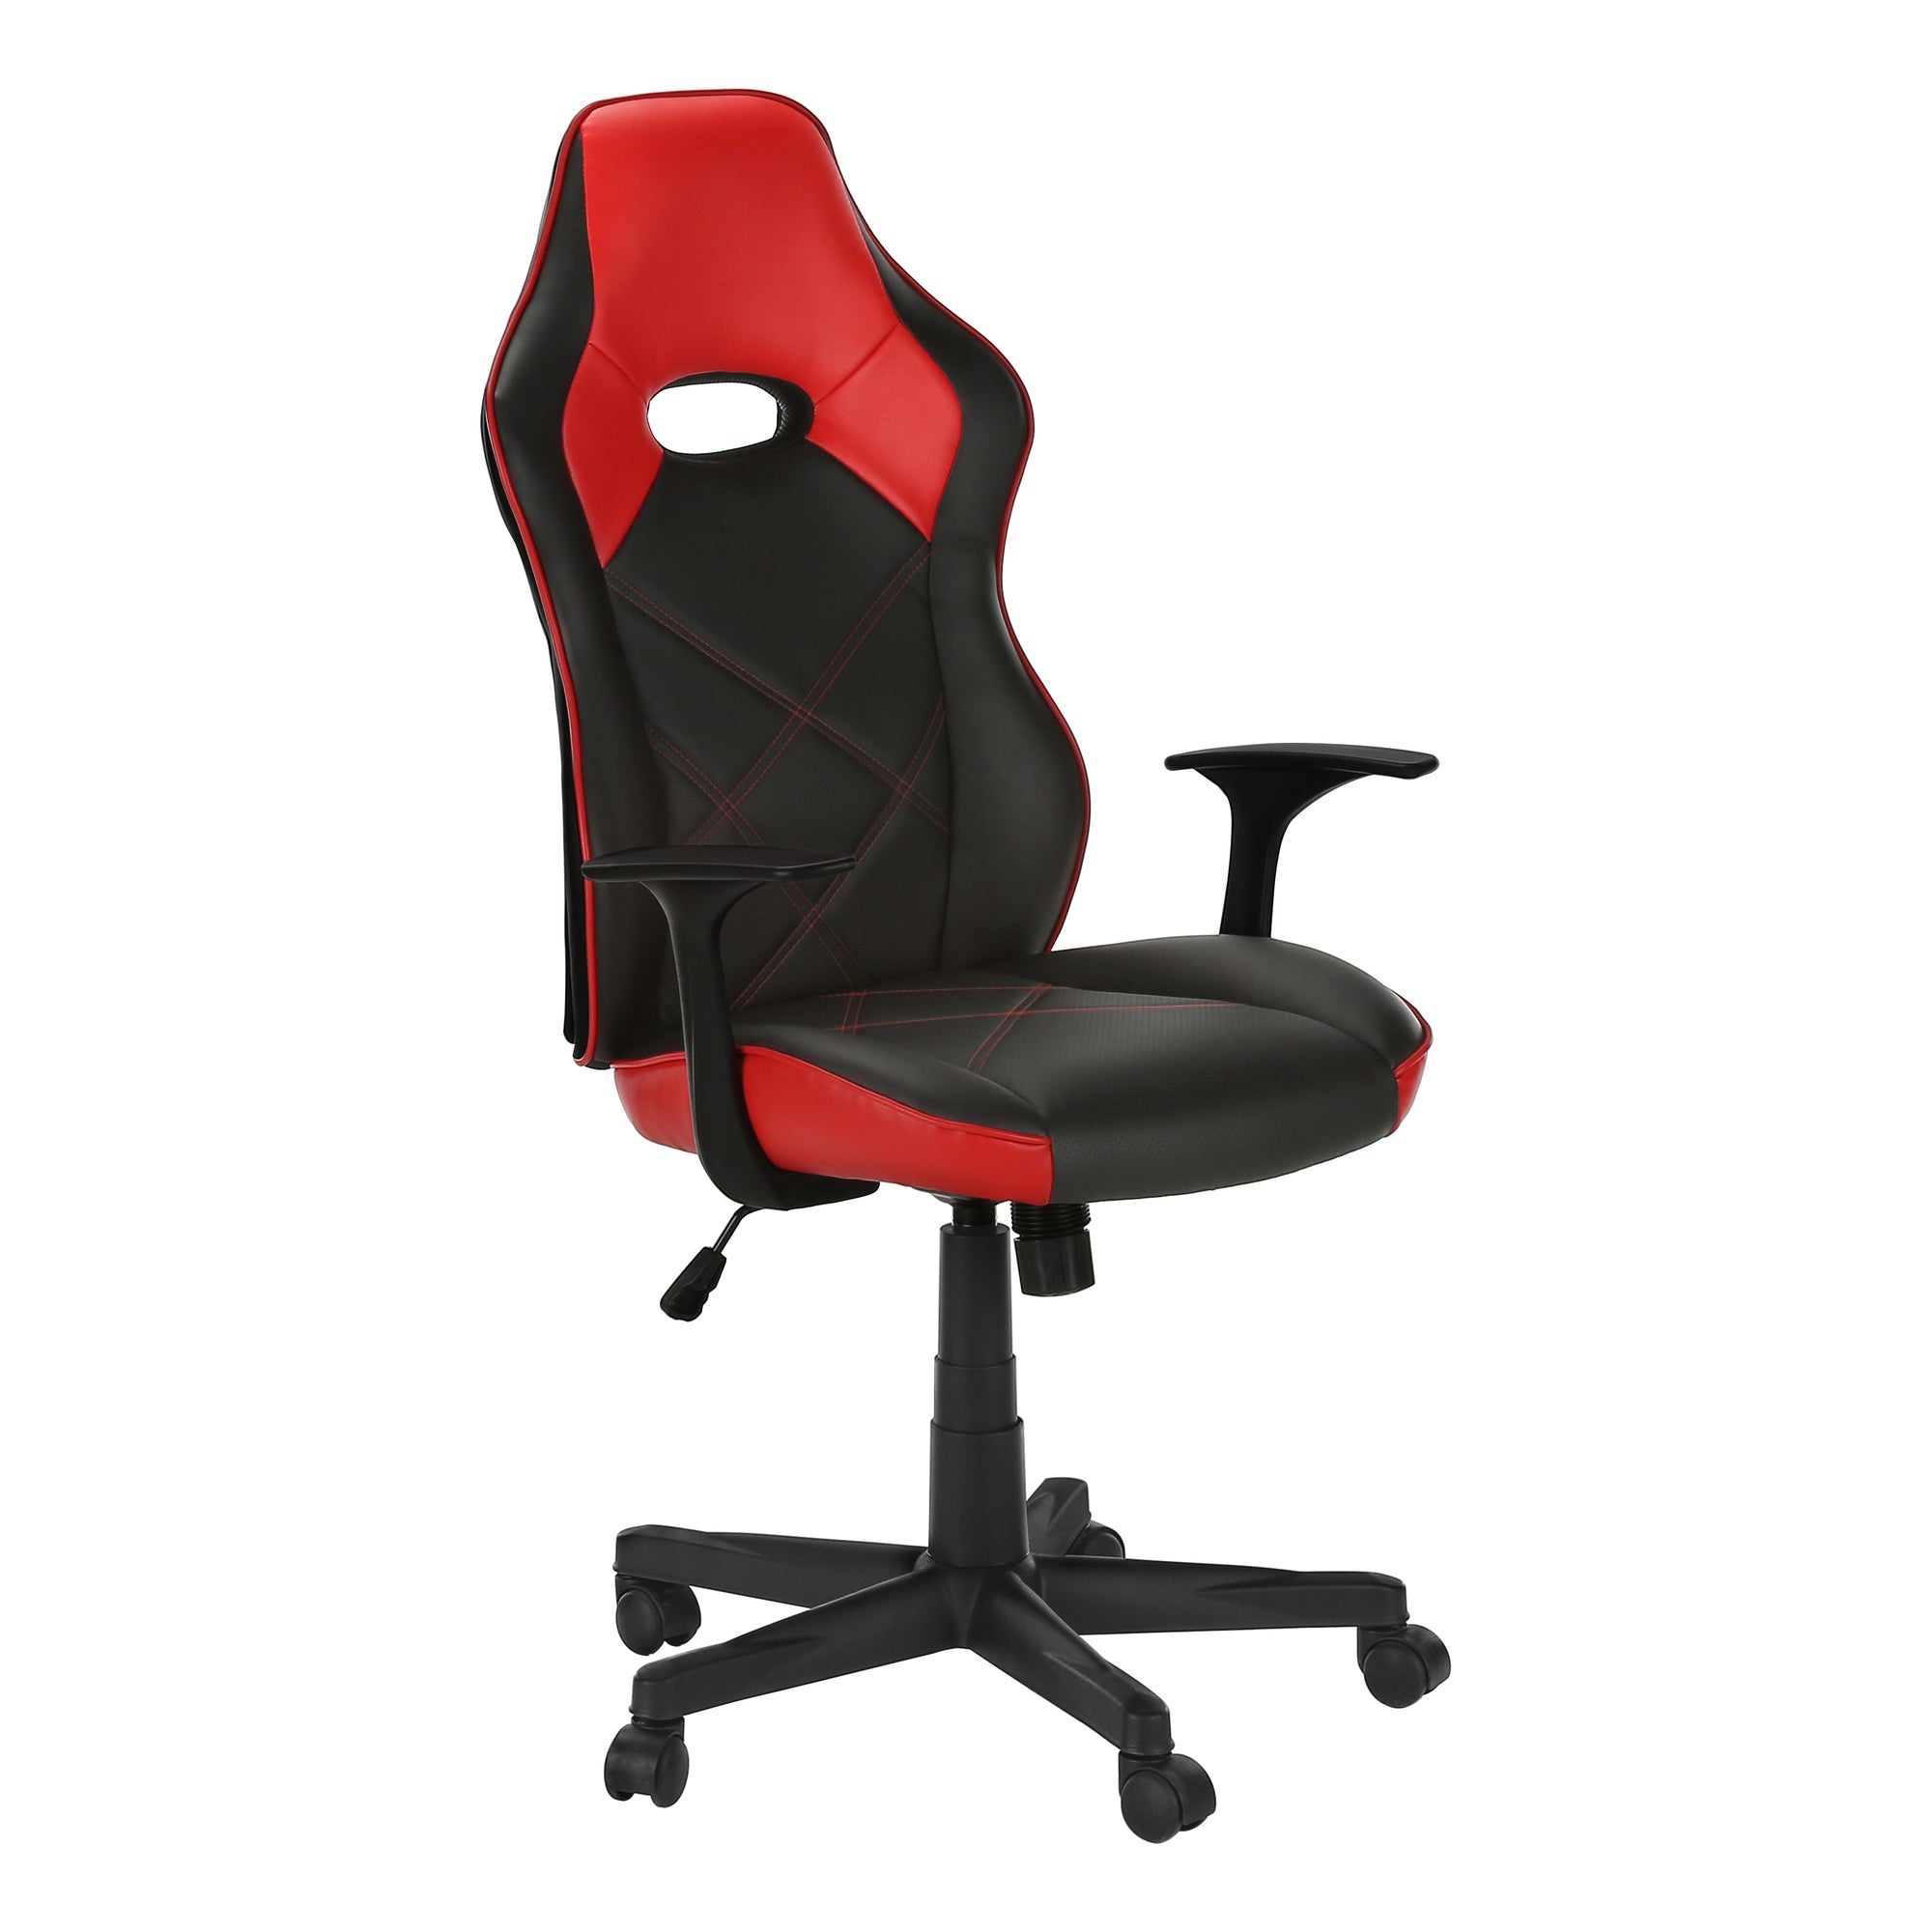 MN-267327    Office Chair - Gaming / Black / Red Leather-Look